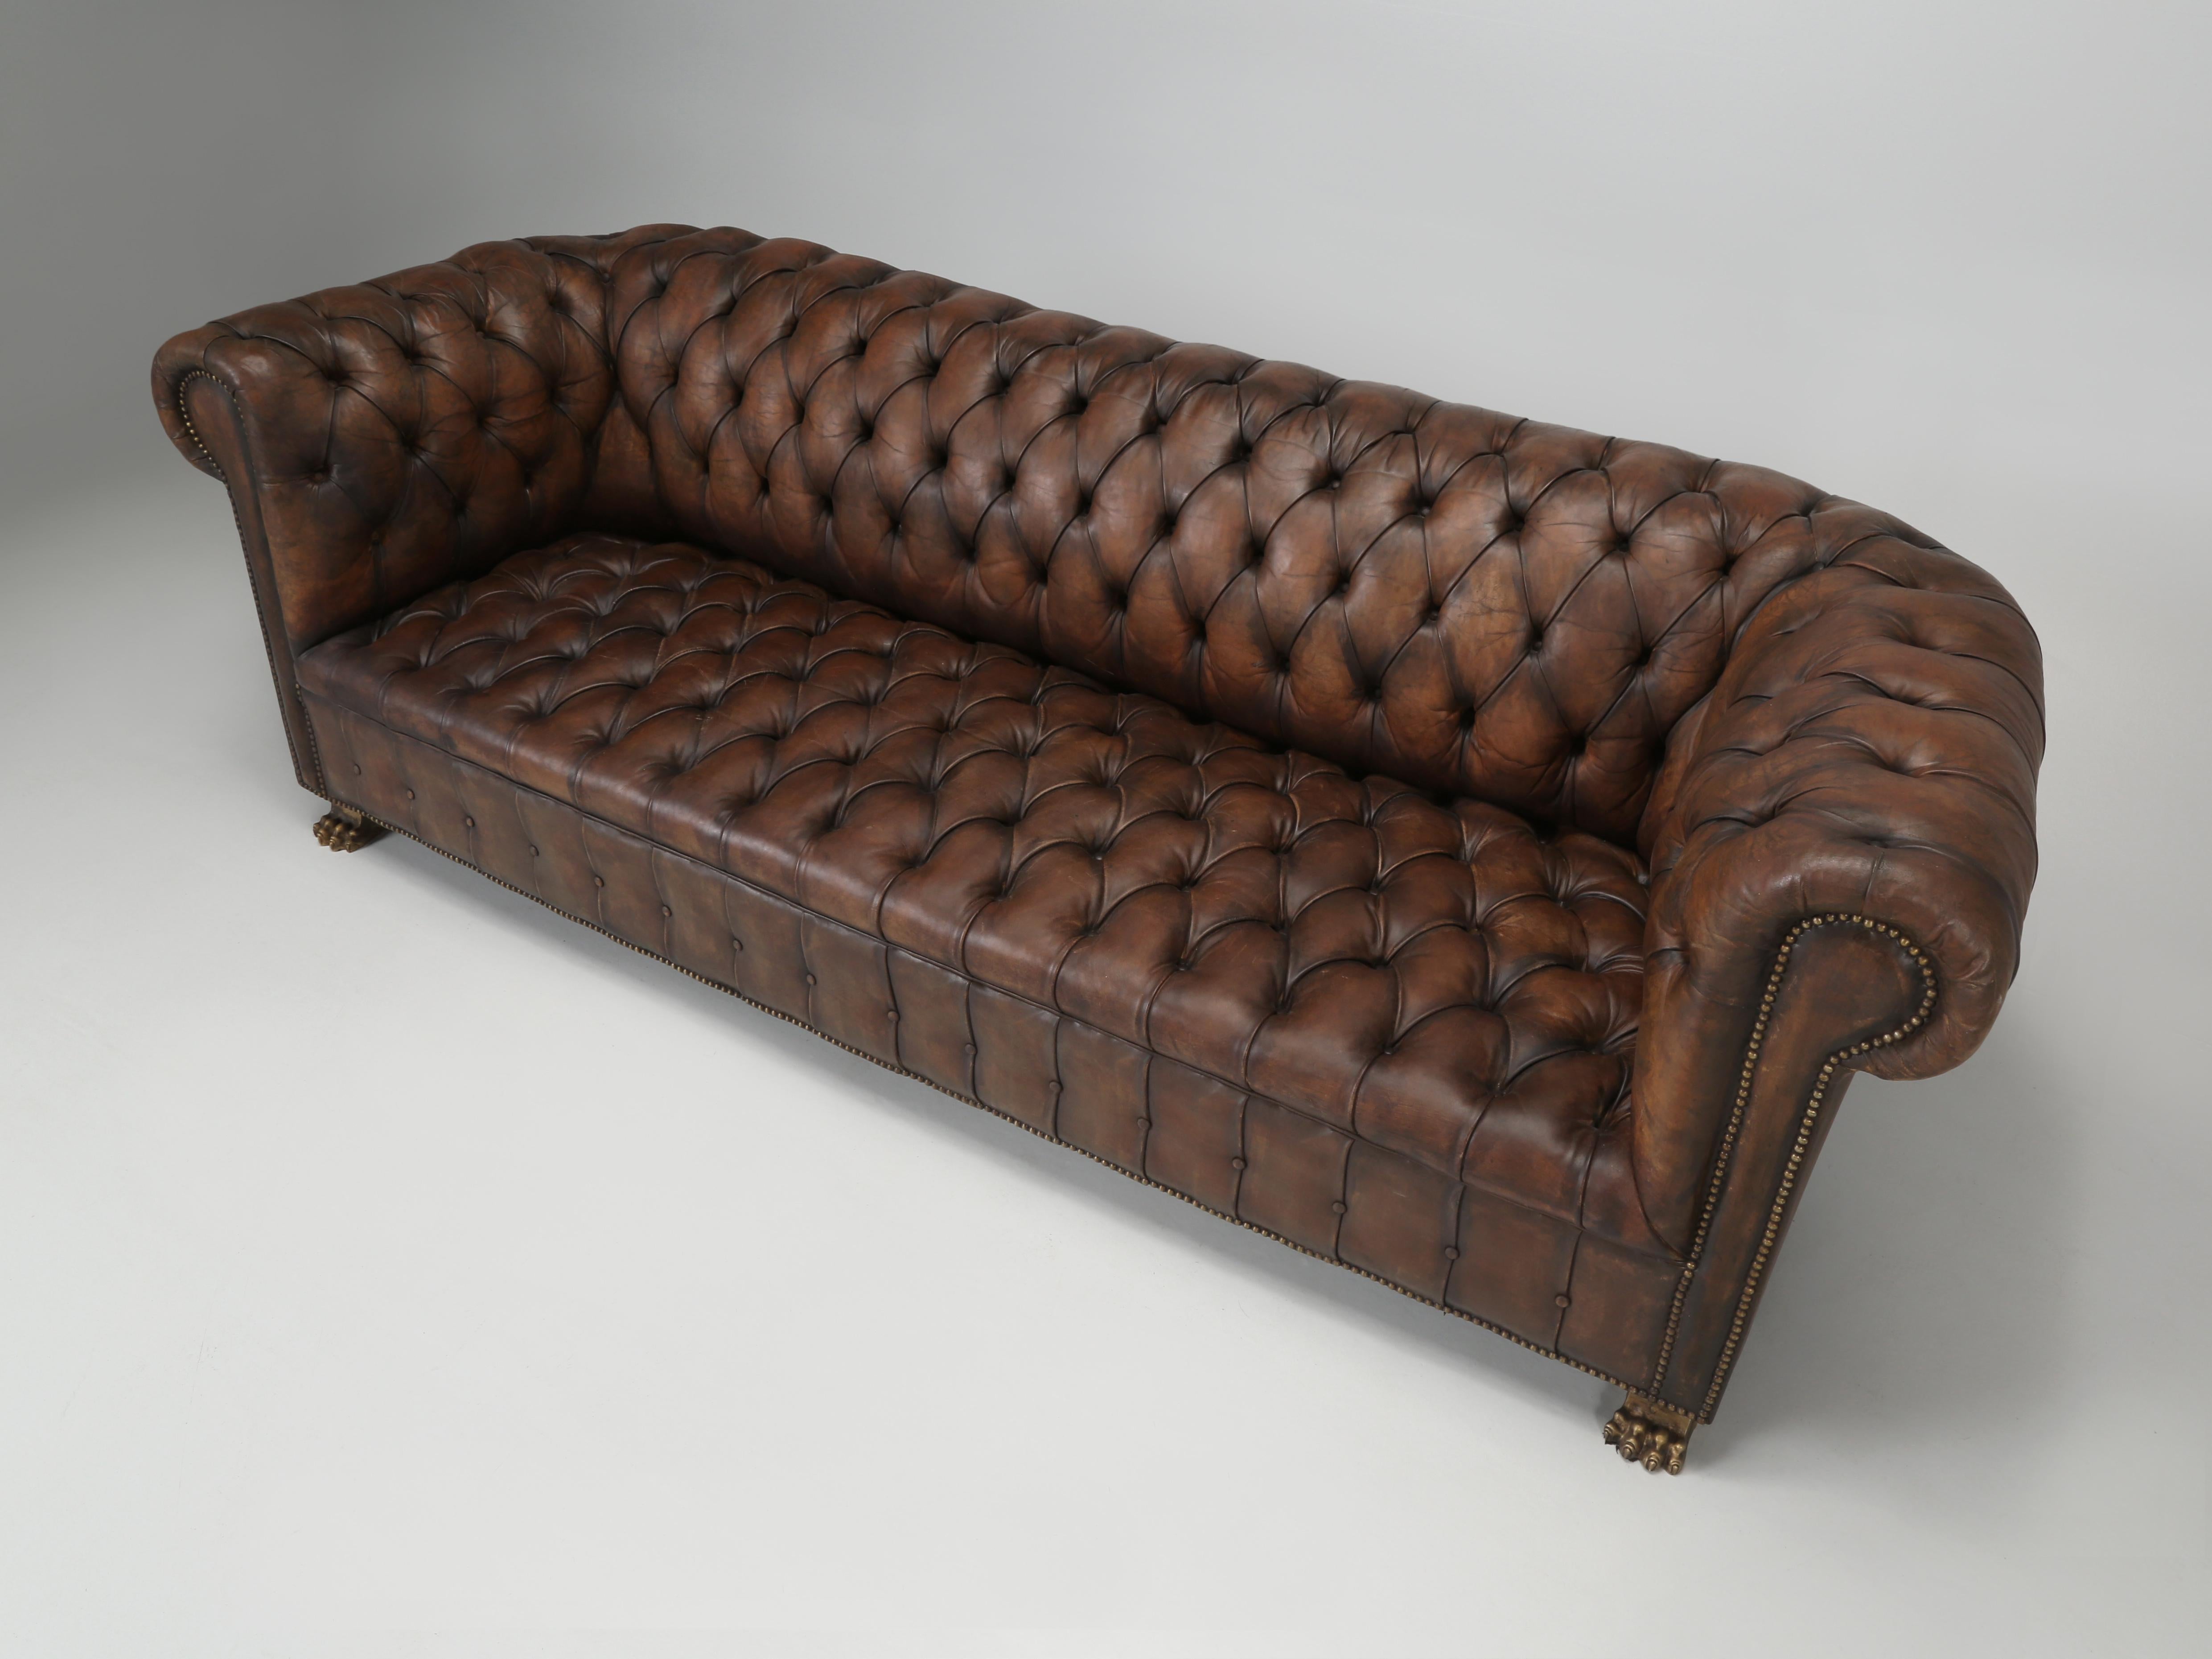 English Chesterfield Sofa Restored Internally Maintains Mostly Original Leather 5